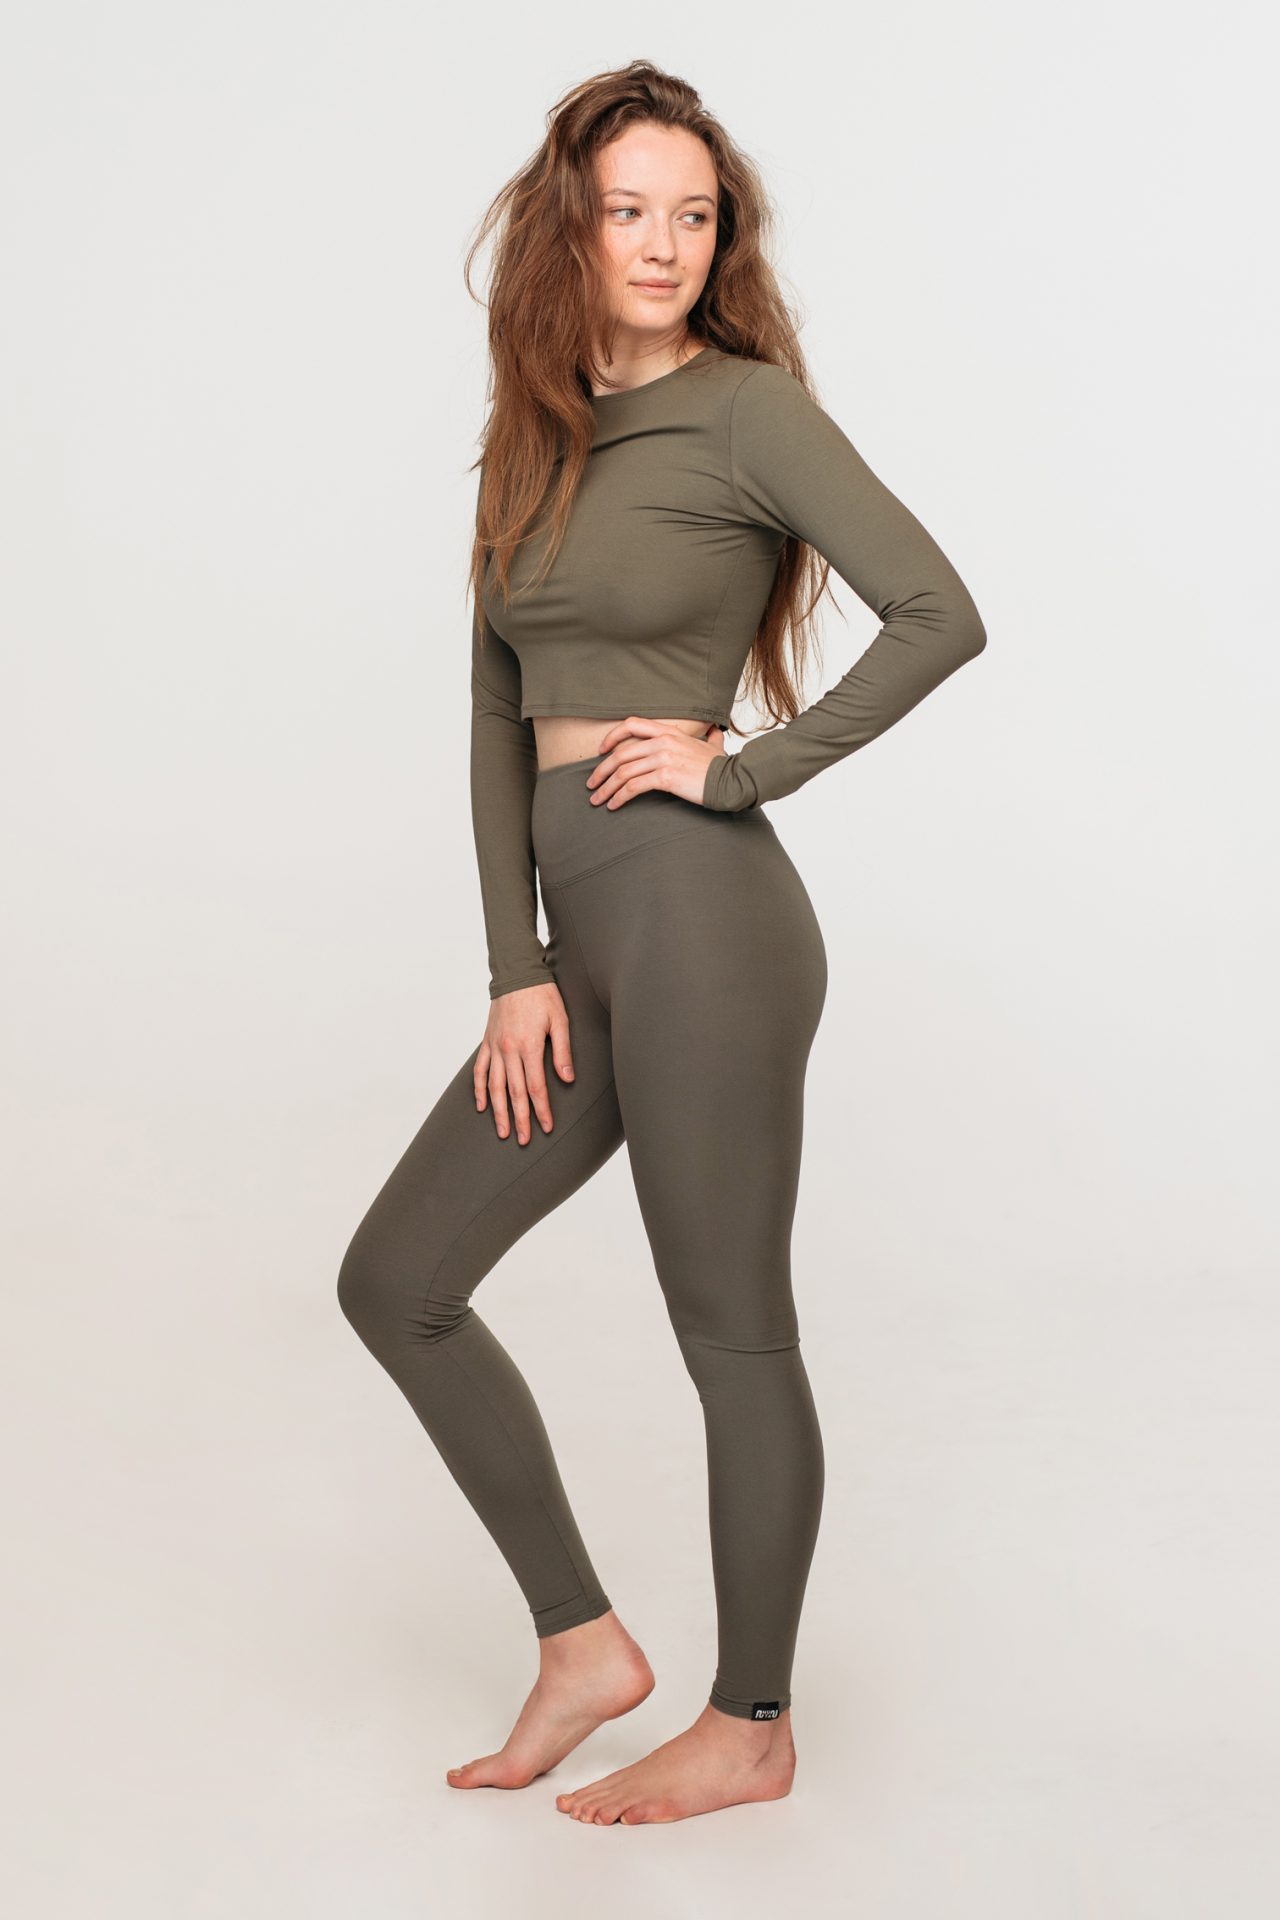 Women's On The Go-to Legging Set made with Organic Cotton